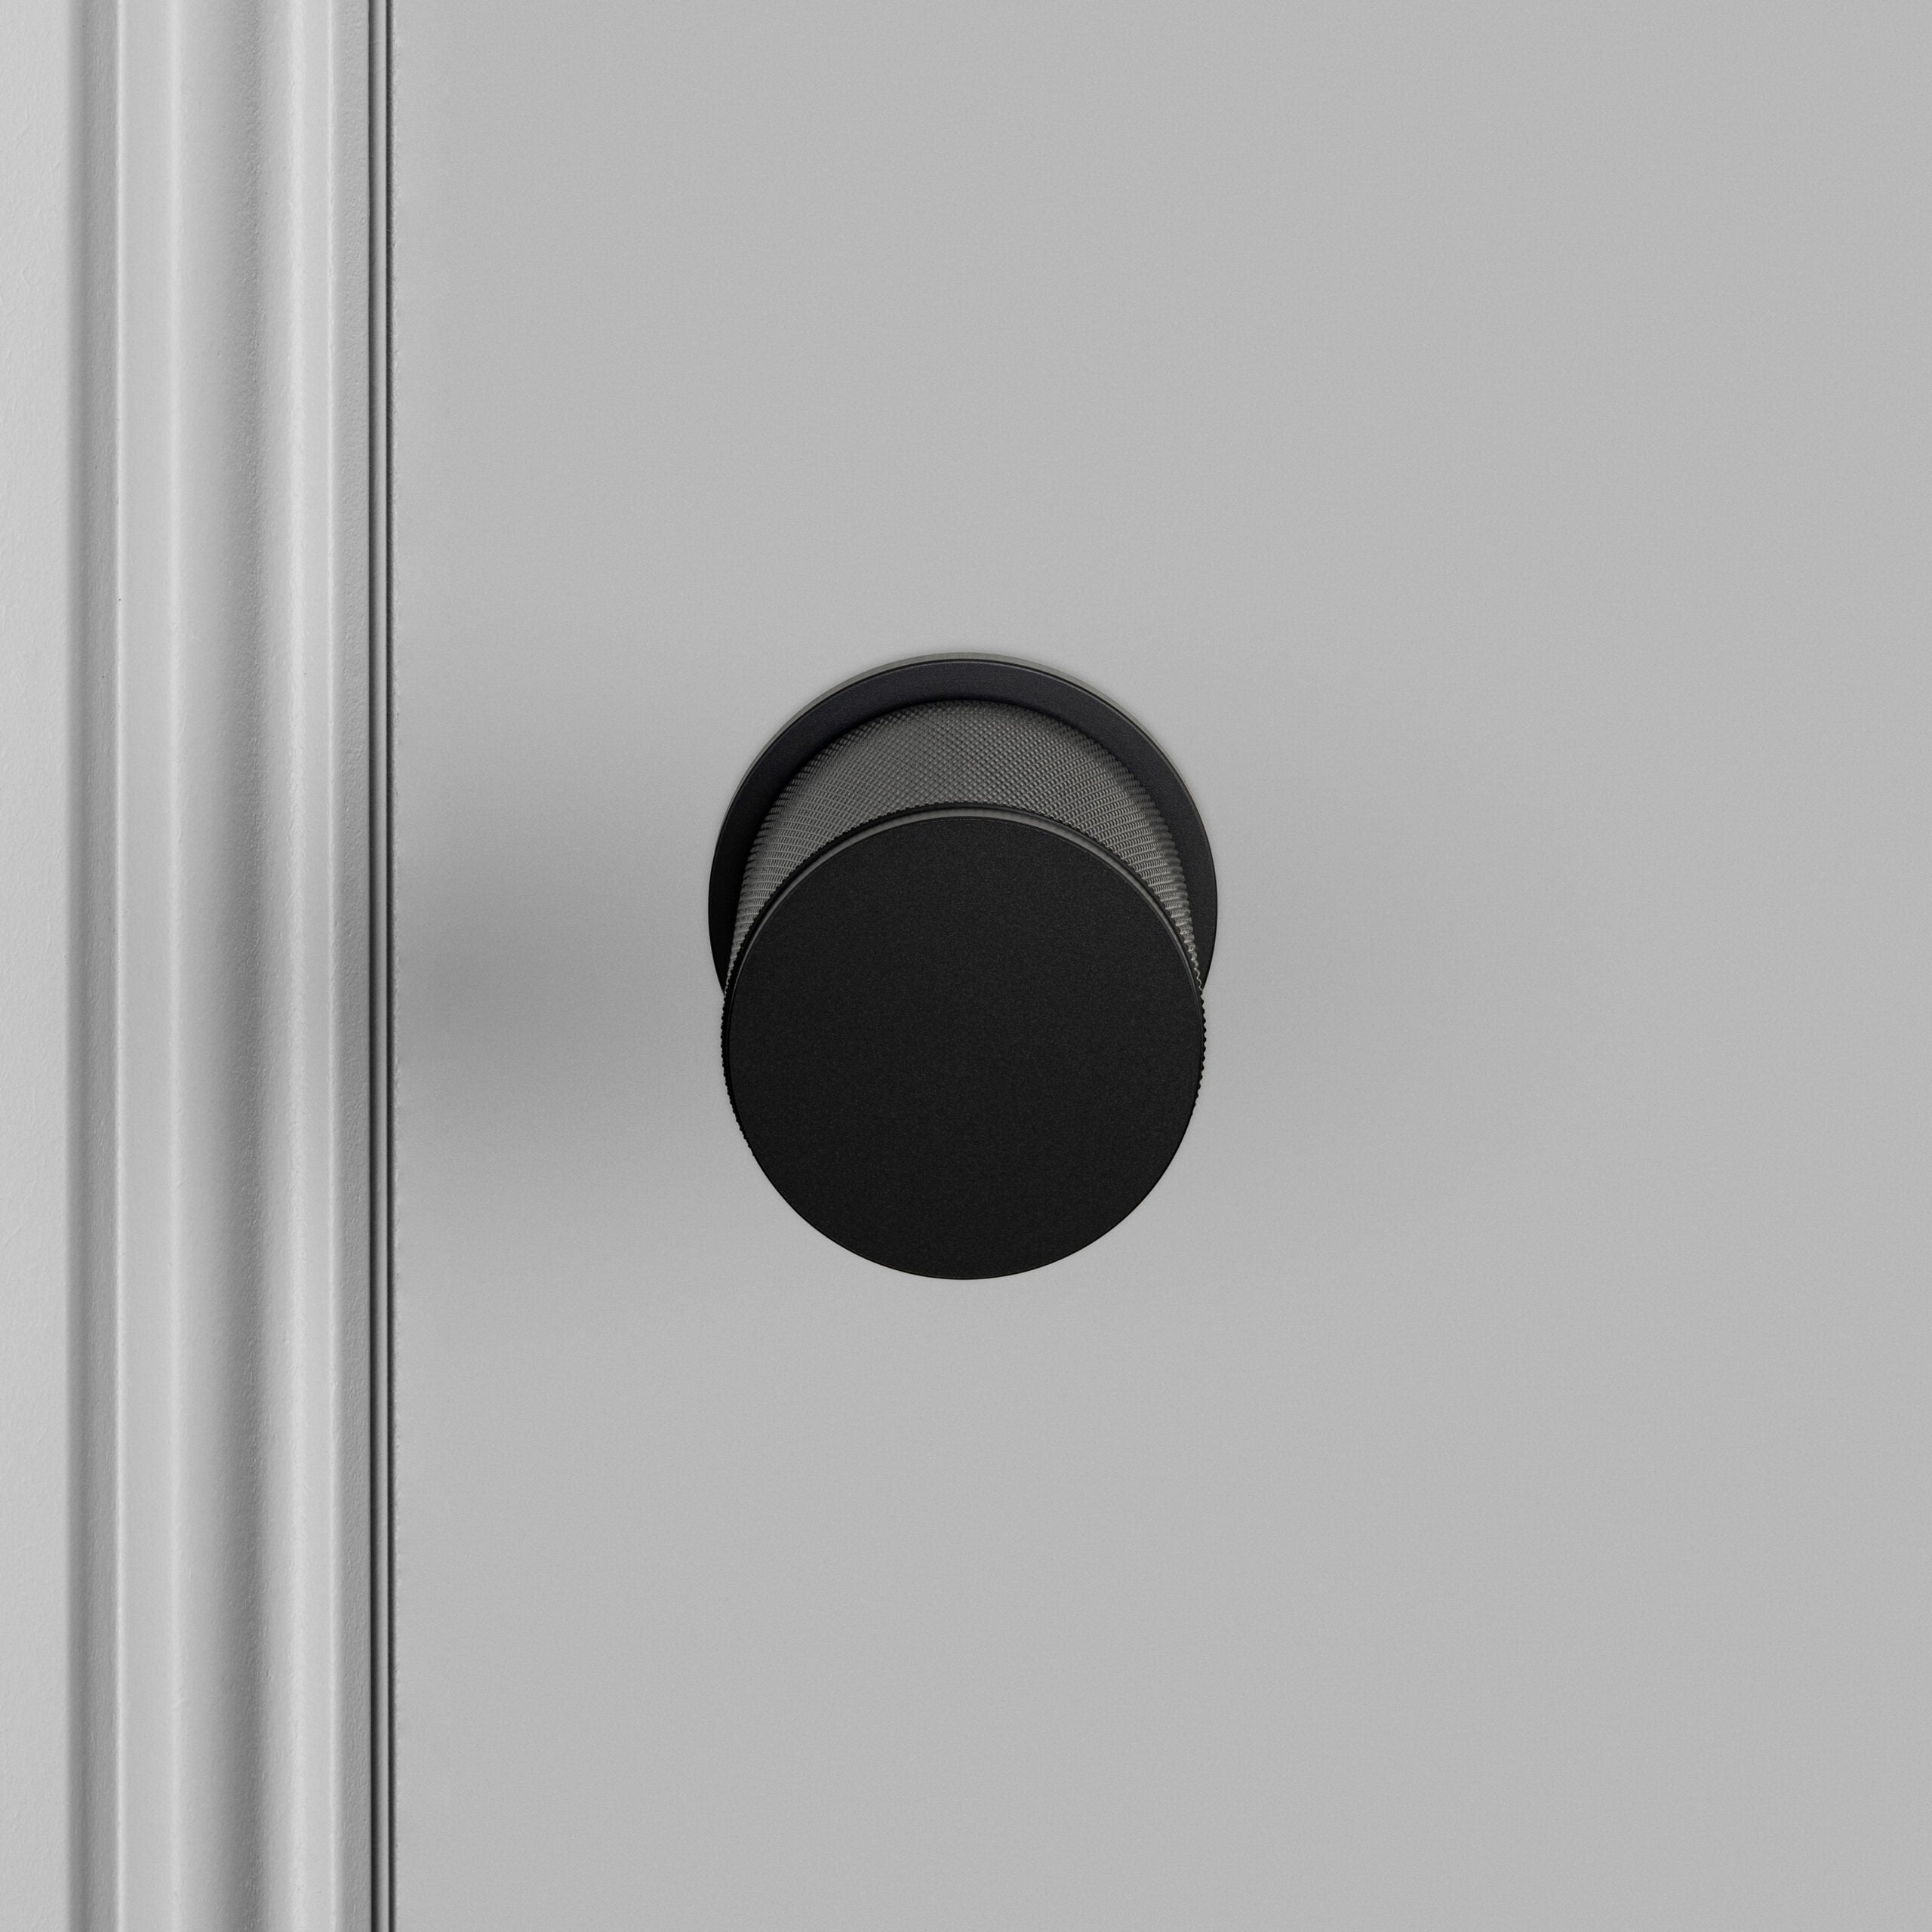 Buster + Punch Door Knob Single Sided, Cross Design, FIXED TYPE Hardware Buster + Punch Black  